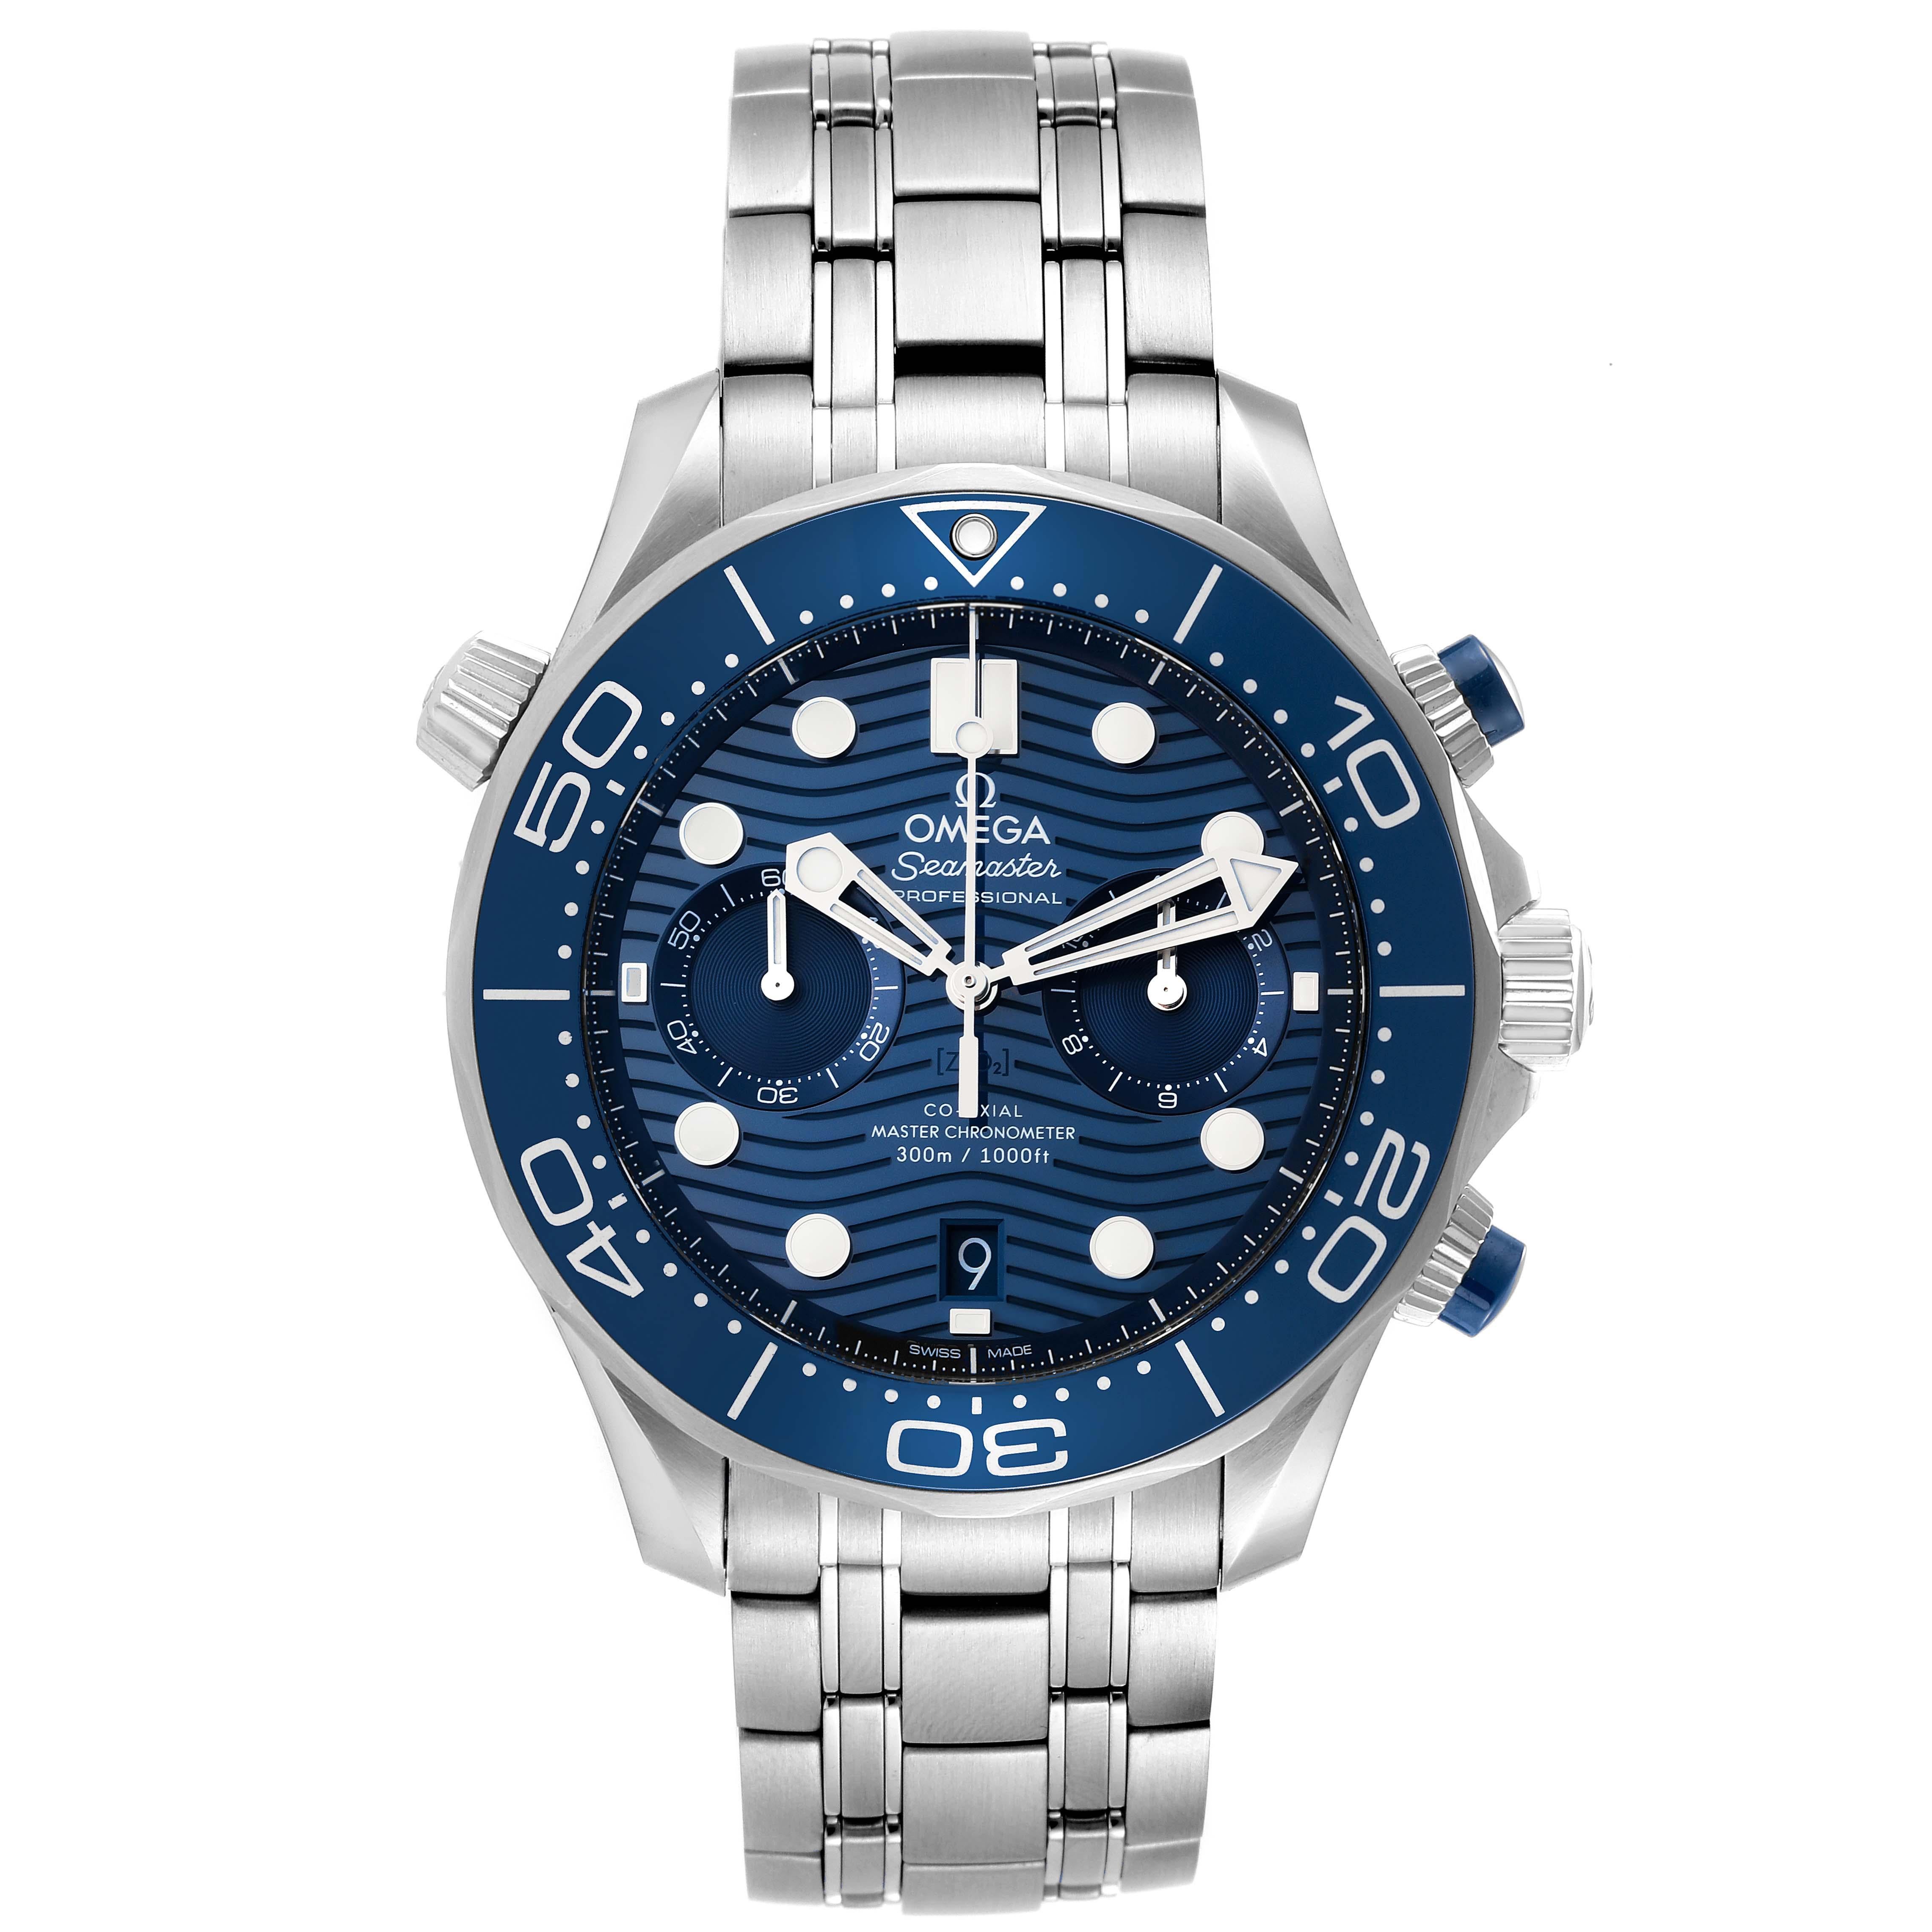 Omega Seamaster 44 Chronograph Steel Mens Watch 210.30.44.51.03.001 Box Card. Automatic Self-winding chronograph movement with column wheel and Co-Axial escapement. Certified Master Chronometer, approved by METAS, resistant to magnetic fields